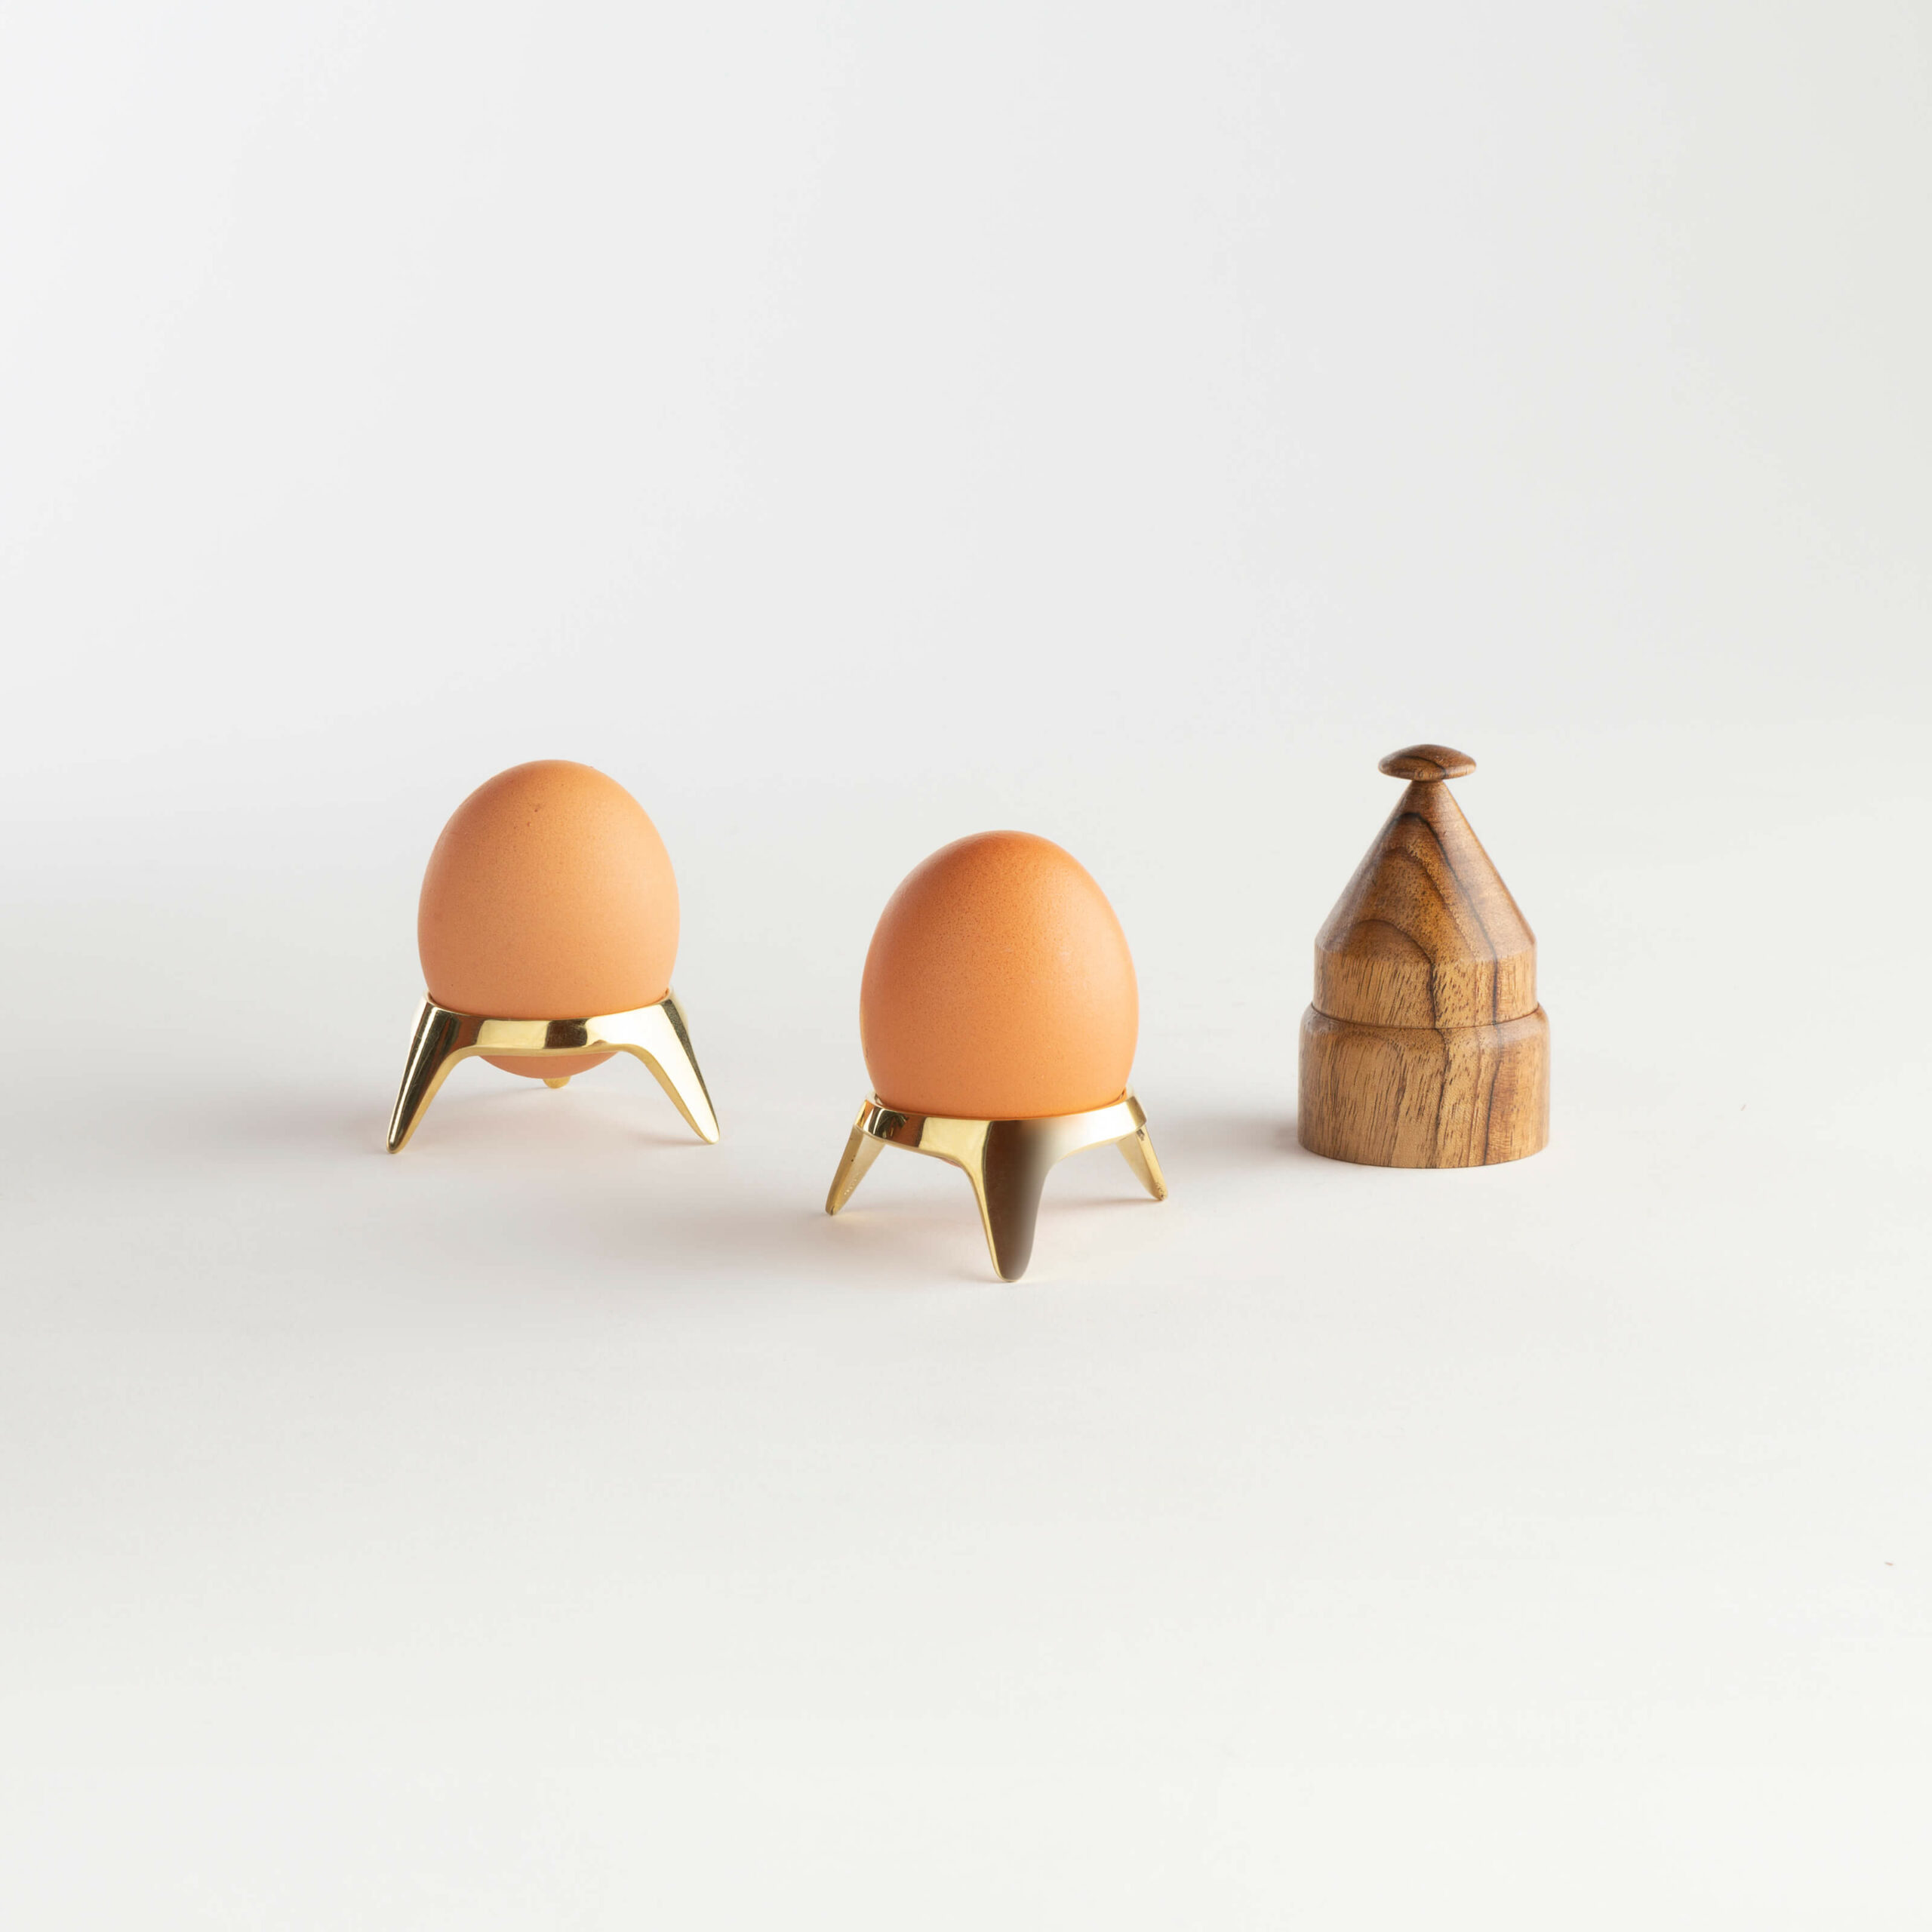 Pair of egg cups